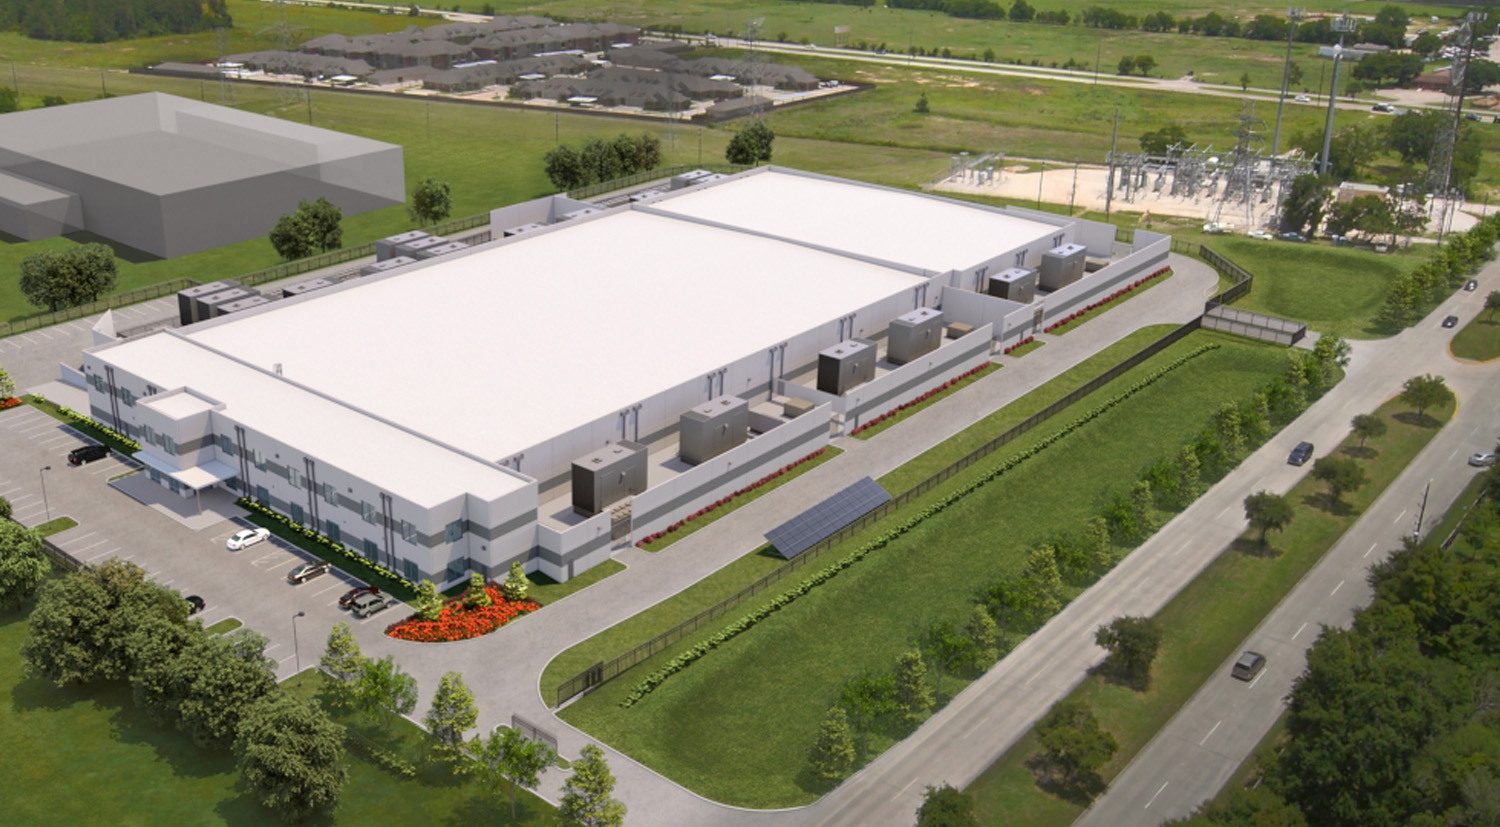 Element Critical Completes Expansion of Houston One Data Center to Meet Increasing Demand for Customizable Data Center Space in Texas